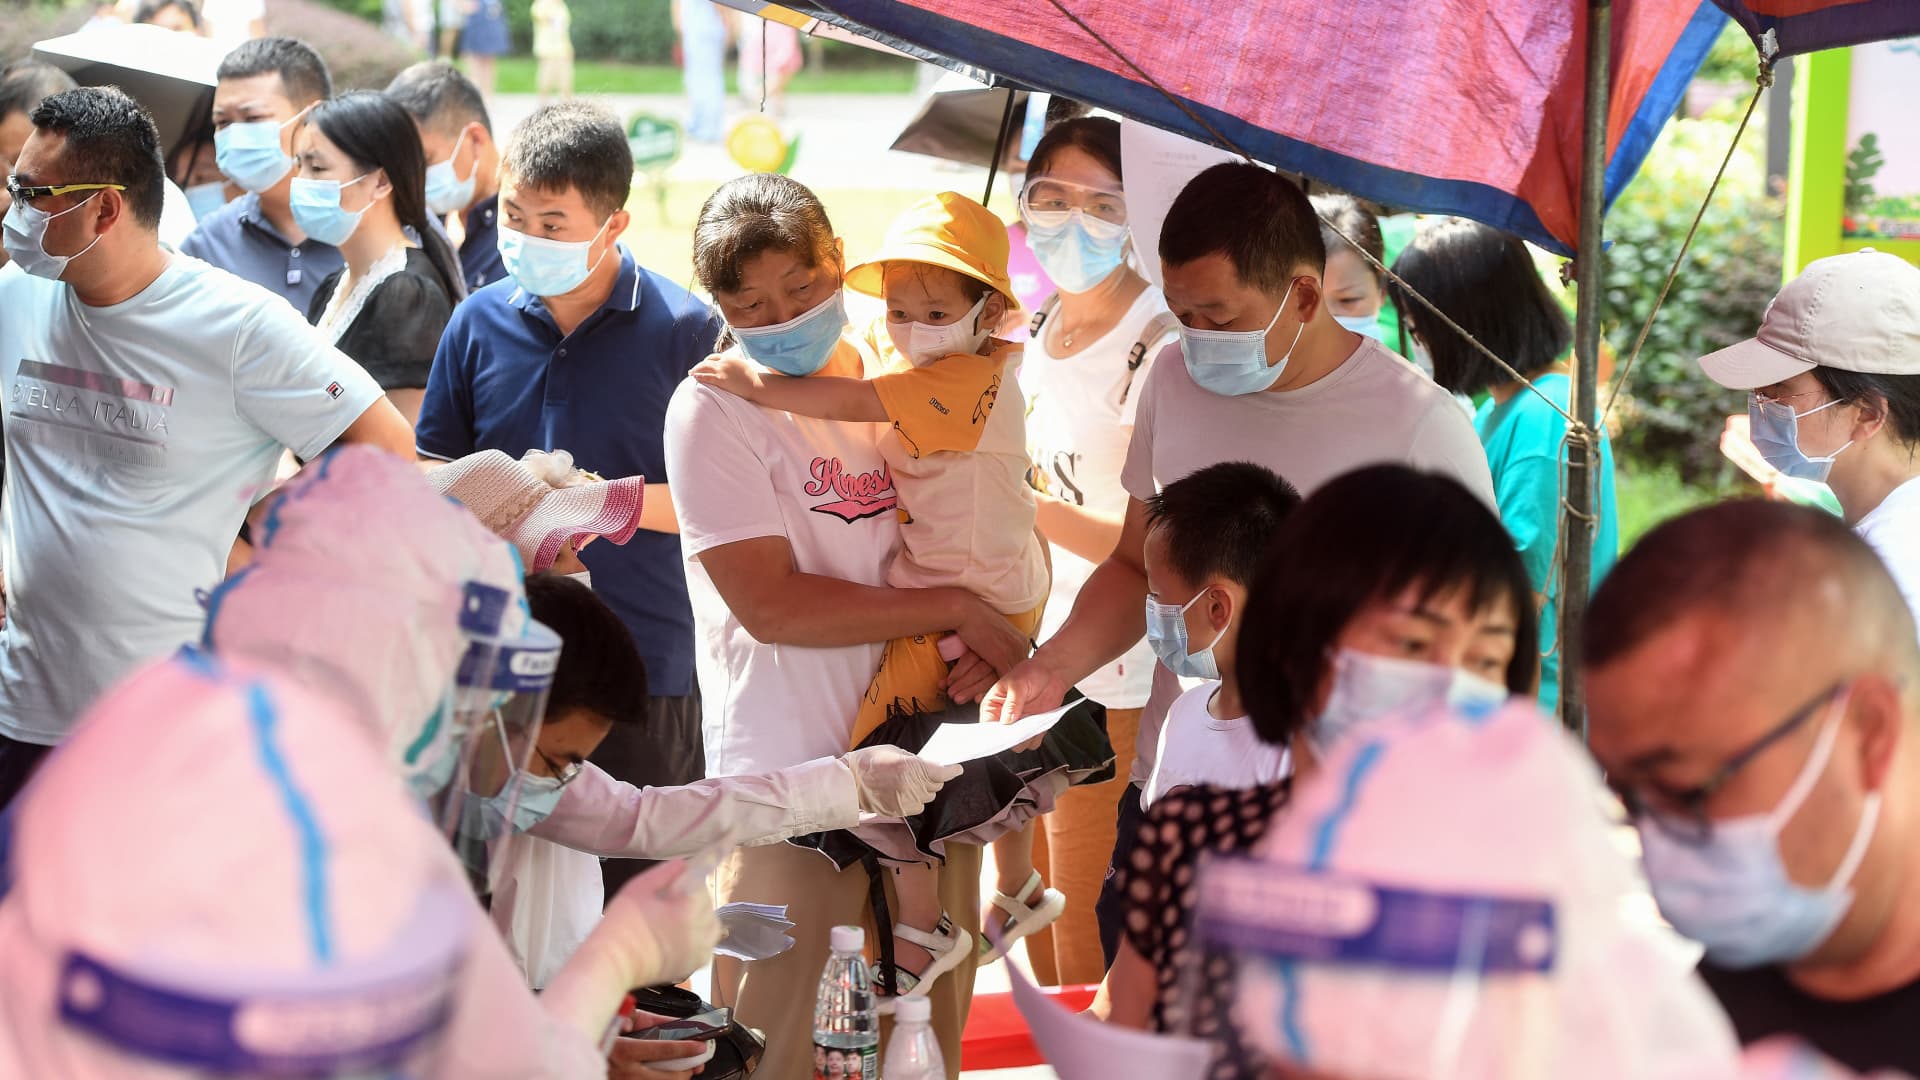 Residents of Wuhan city in China's Hubei province queue to take nucleic acid tests for Covid-19 on August 3, 2021.